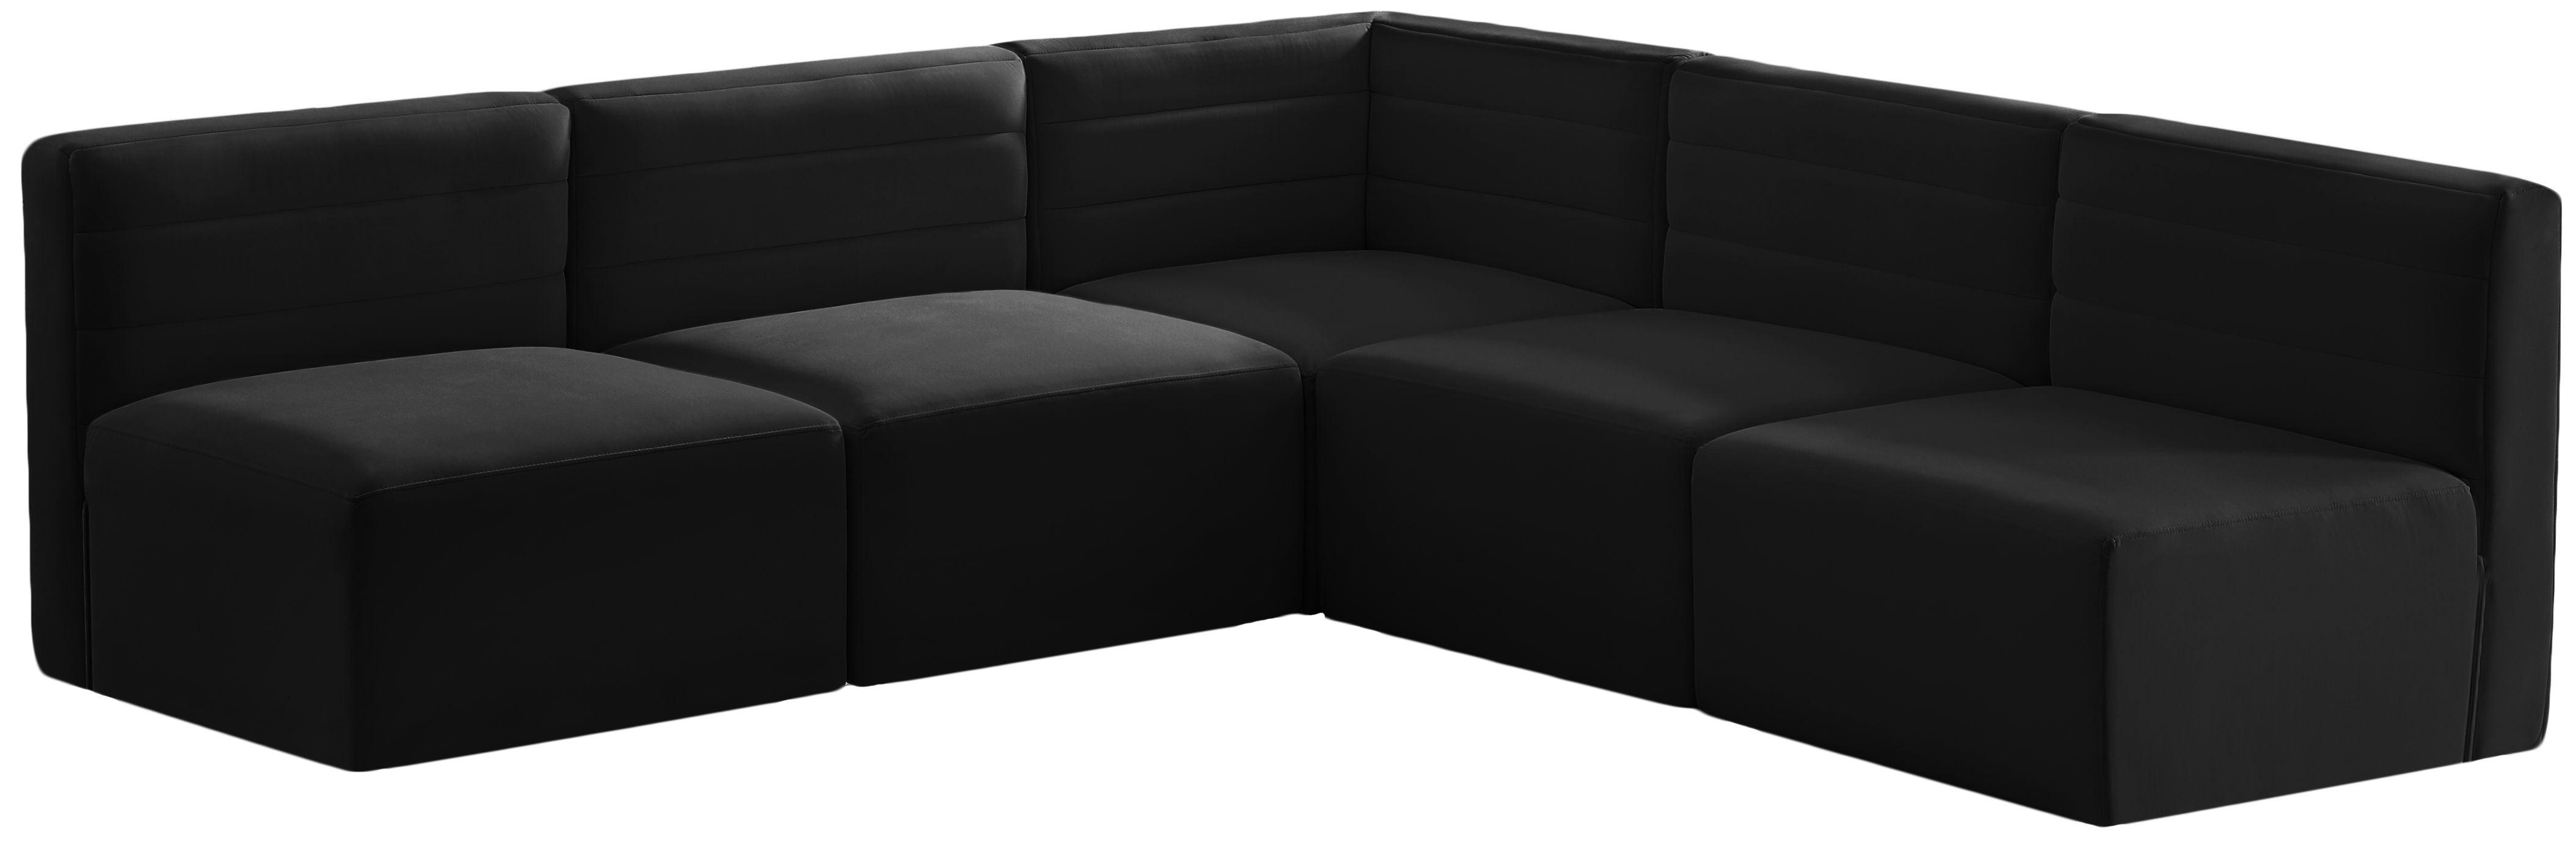 Meridian Furniture - Quincy - Modular Sectional - Black - Fabric - Modern & Contemporary - 5th Avenue Furniture